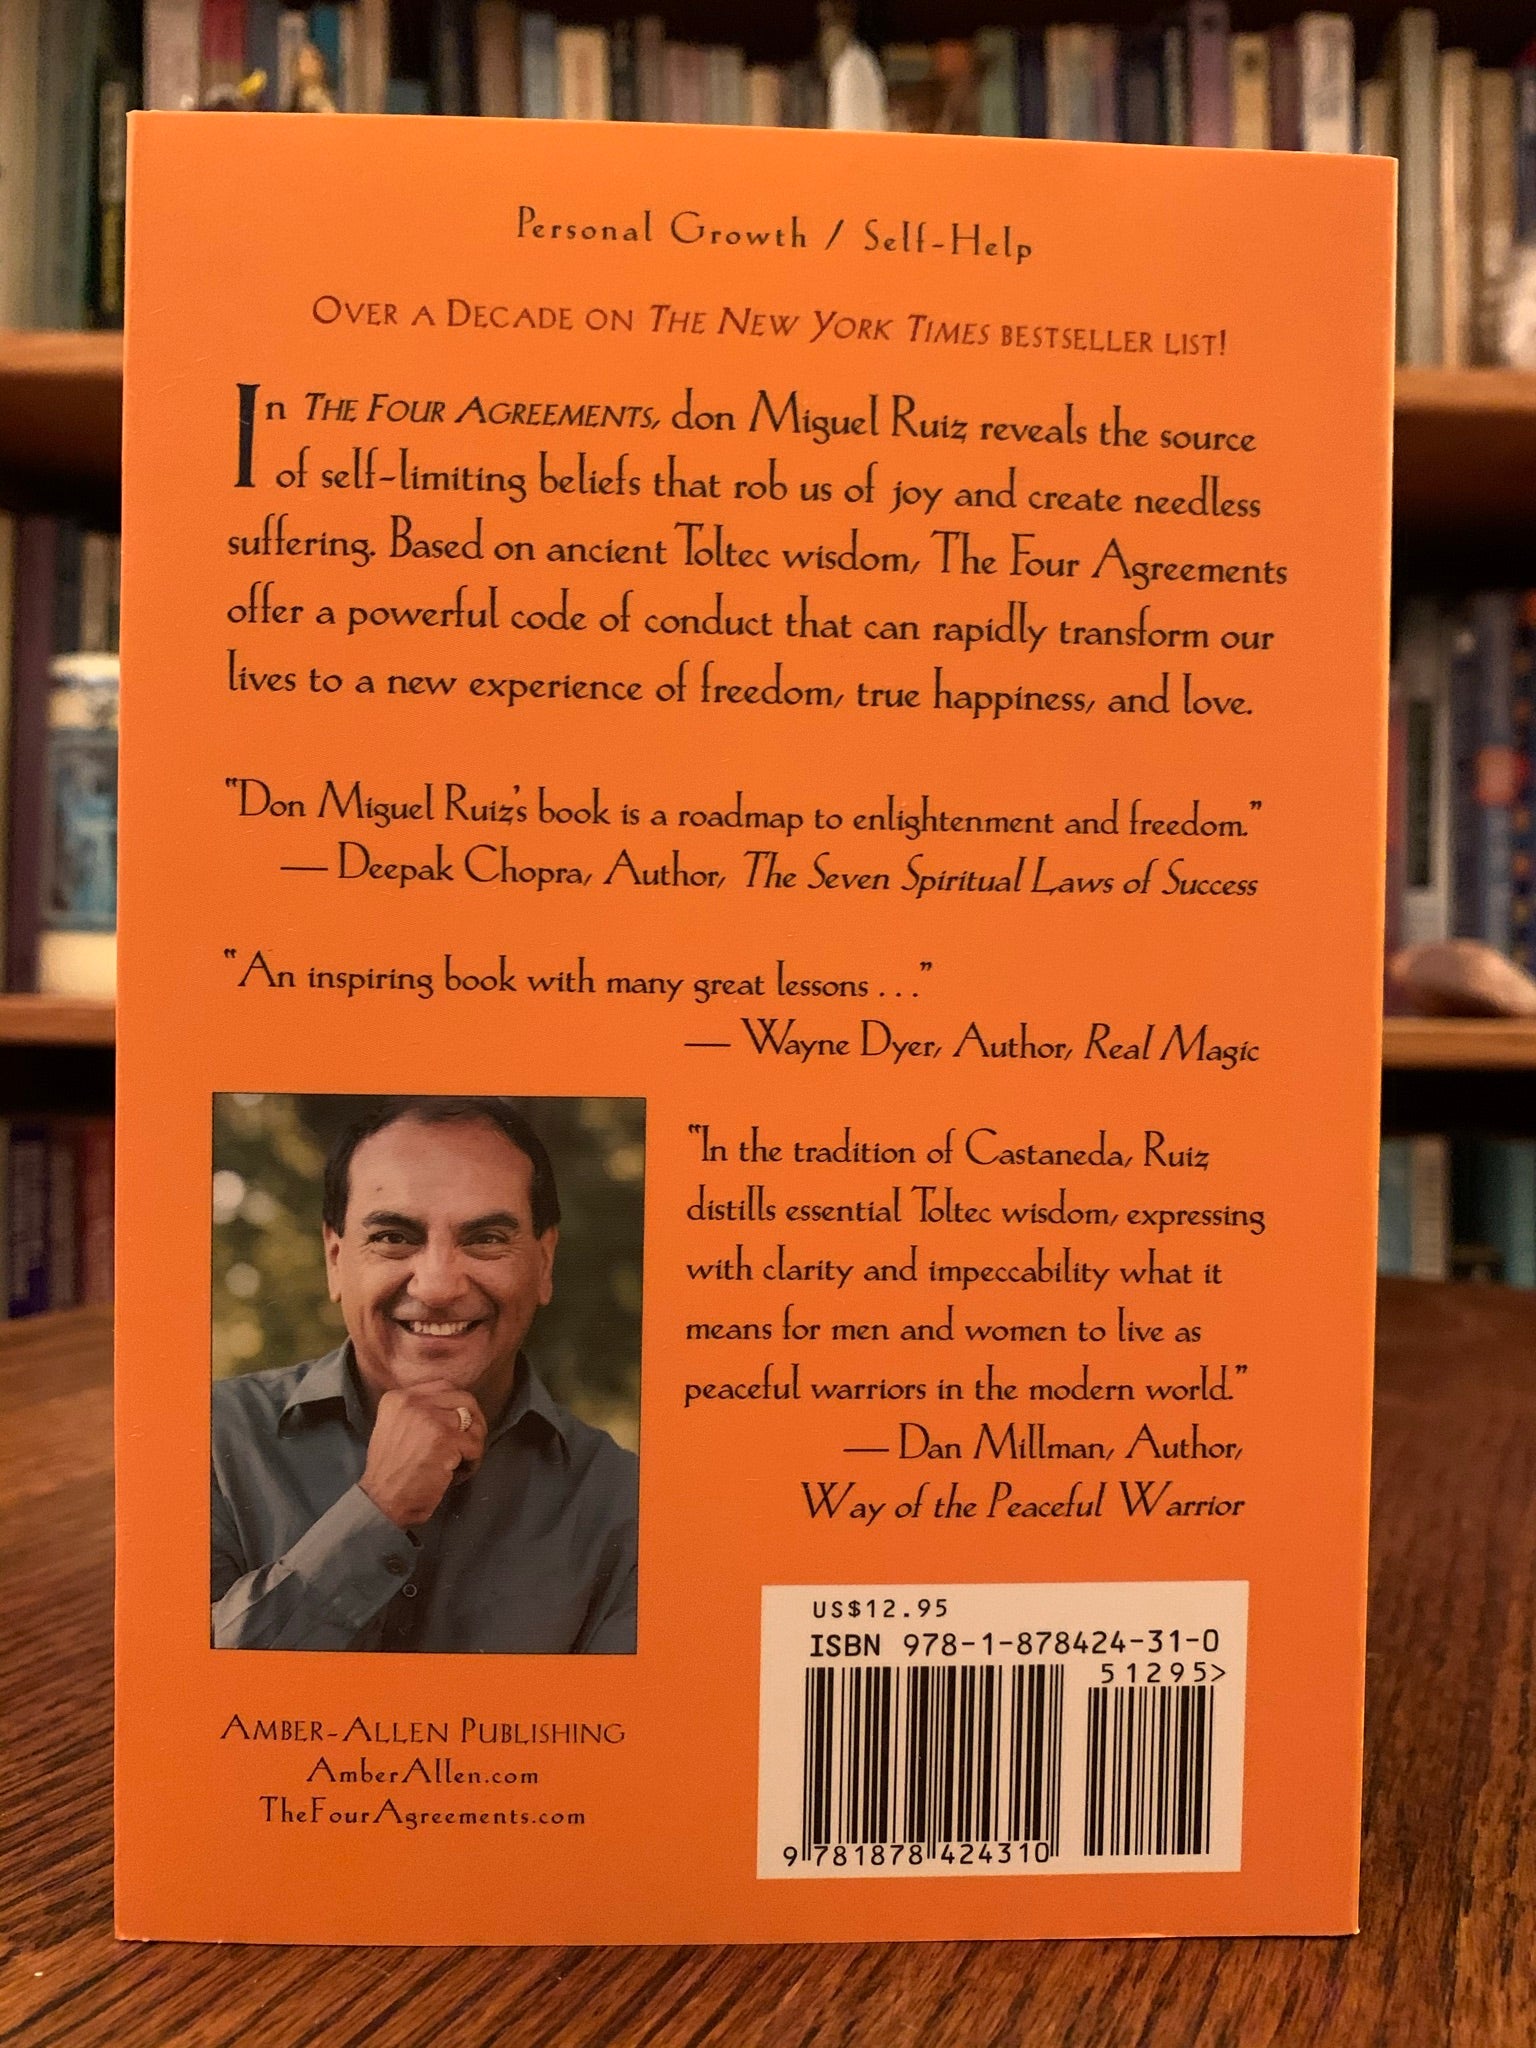 Close-up back cover. Based on ancient Toltec Wisdom, The Four Agreements by don Miguel Ruiz, guides us to a personal and spiritual transformation using four simple words and their power, meaning and call to "action." "In the tradition of Casteneda, Ruiz distills essential Toltec wisdom, expressing with clarity and impeccability, what it means for men and women to live as peaceful warriors in the modern world (Dan Milllman, author of Way of the Peaceful Warrior). Cost is $12.95